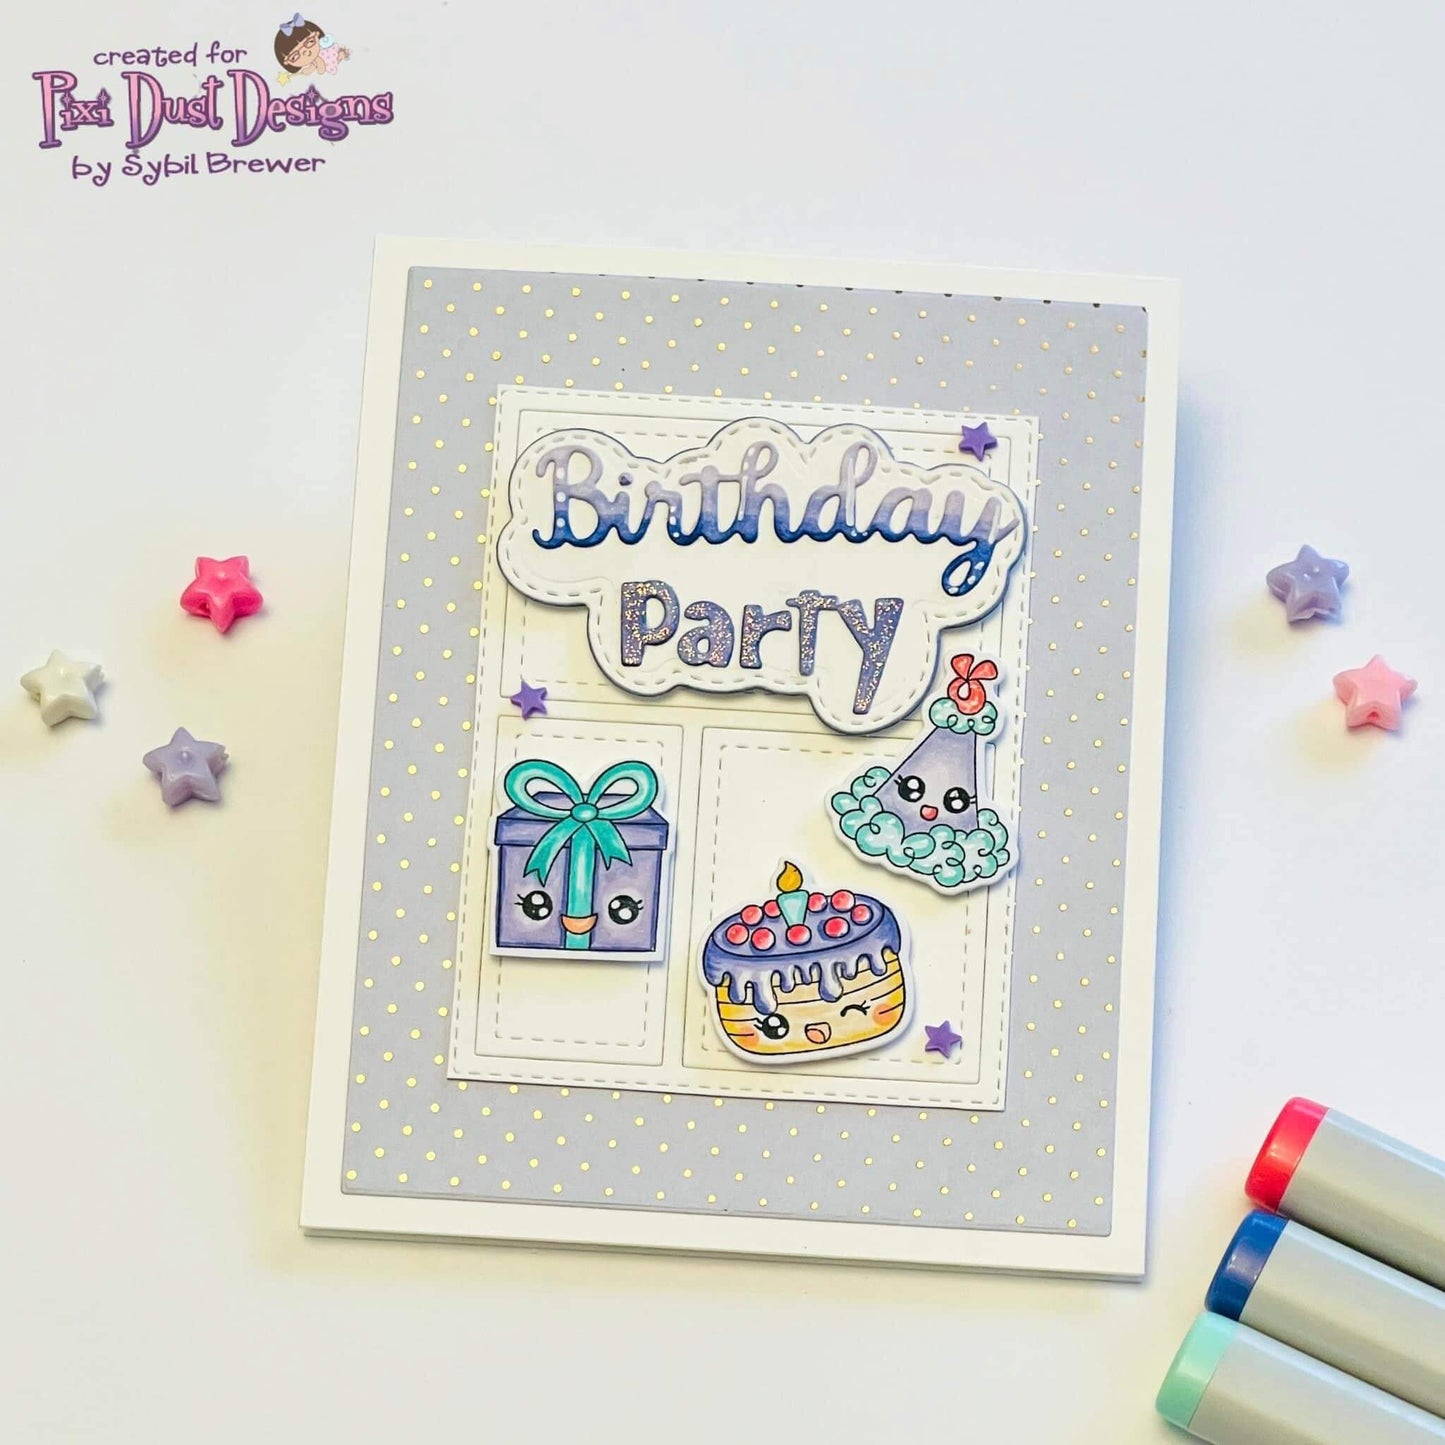 It's Your Birthday stamp and Pixi Cuts Die Bundle